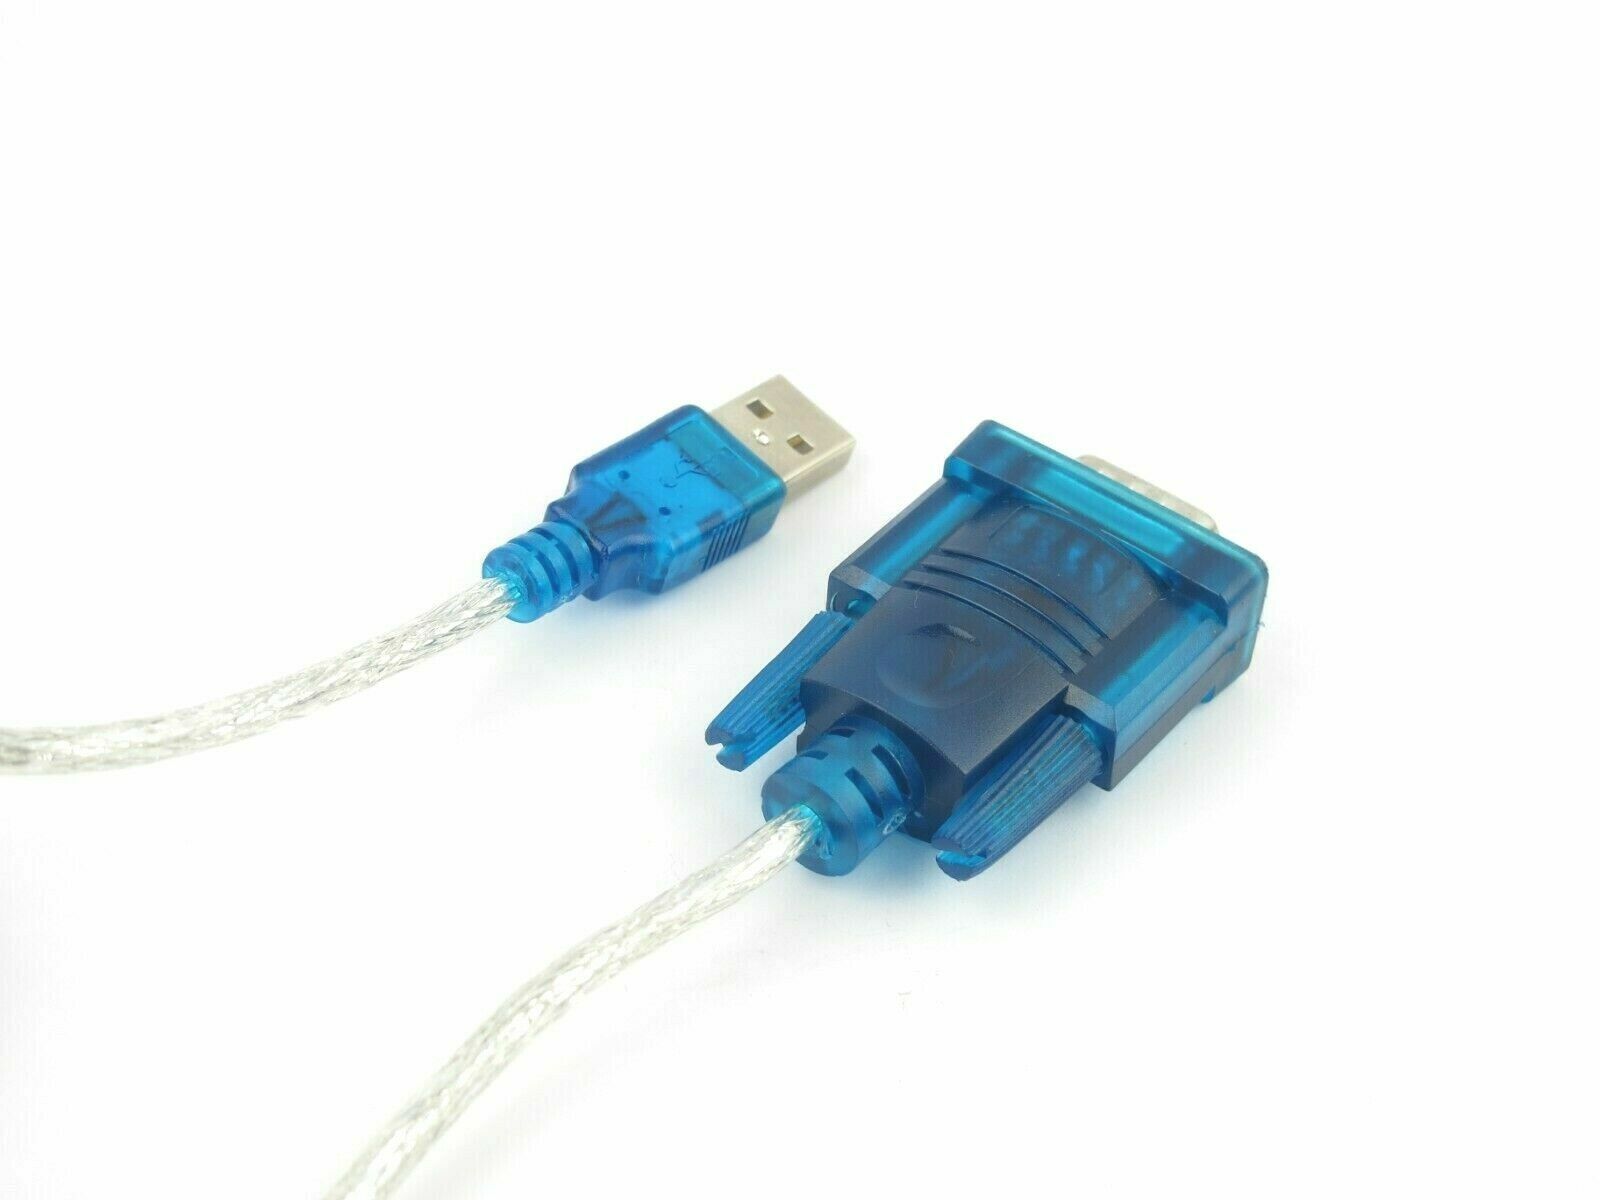 2 Pack USB 2.0 to RS232 Serial 9 Pin 9P DB9 Adapter Converter Cable Cord New Unbranded Does not apply - фотография #5